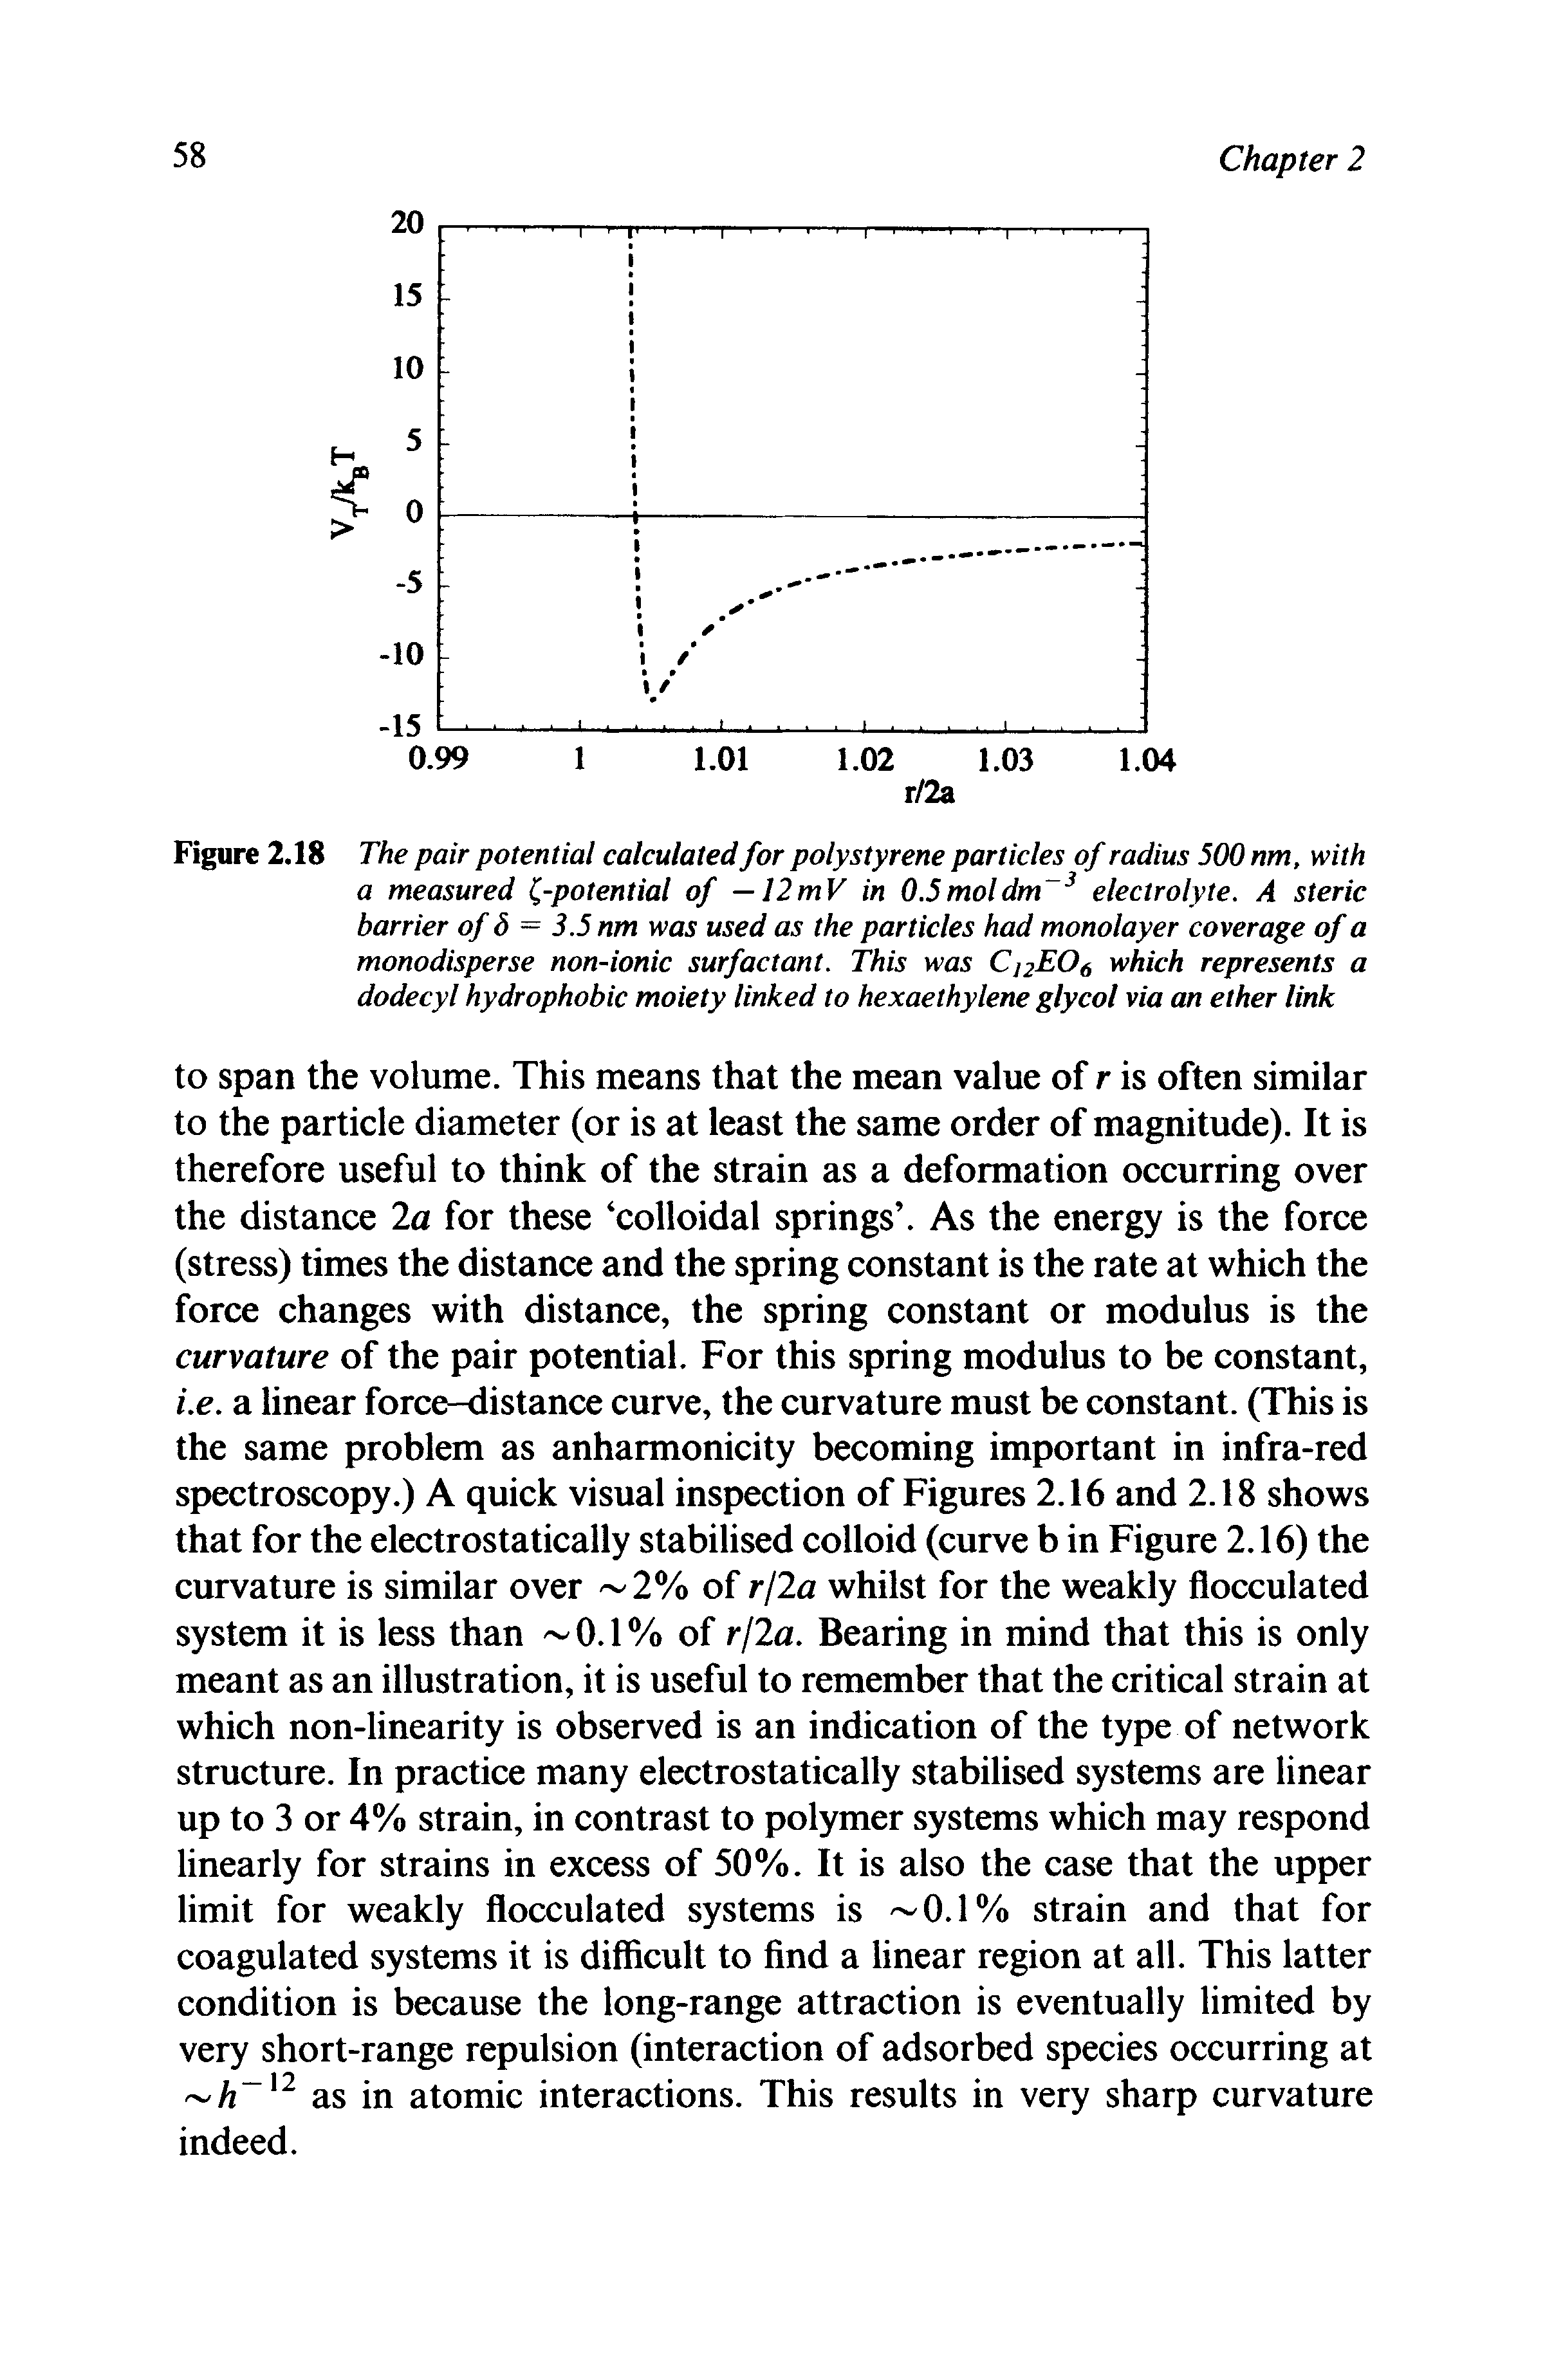 Figure 2.18 The pair potential calculated for polystyrene particles of radius 500 nm, with a measured (.-potential of —12mV in 0.5moldm 3 electrolyte. A steric barrier of S = 3.5 nm was used as the particles had monolayer coverage of a monodisperse non-ionic surfactant. This was C 2E06 which represents a dodecyl hydrophobic moiety linked to hexaethylene glycol via an ether link...